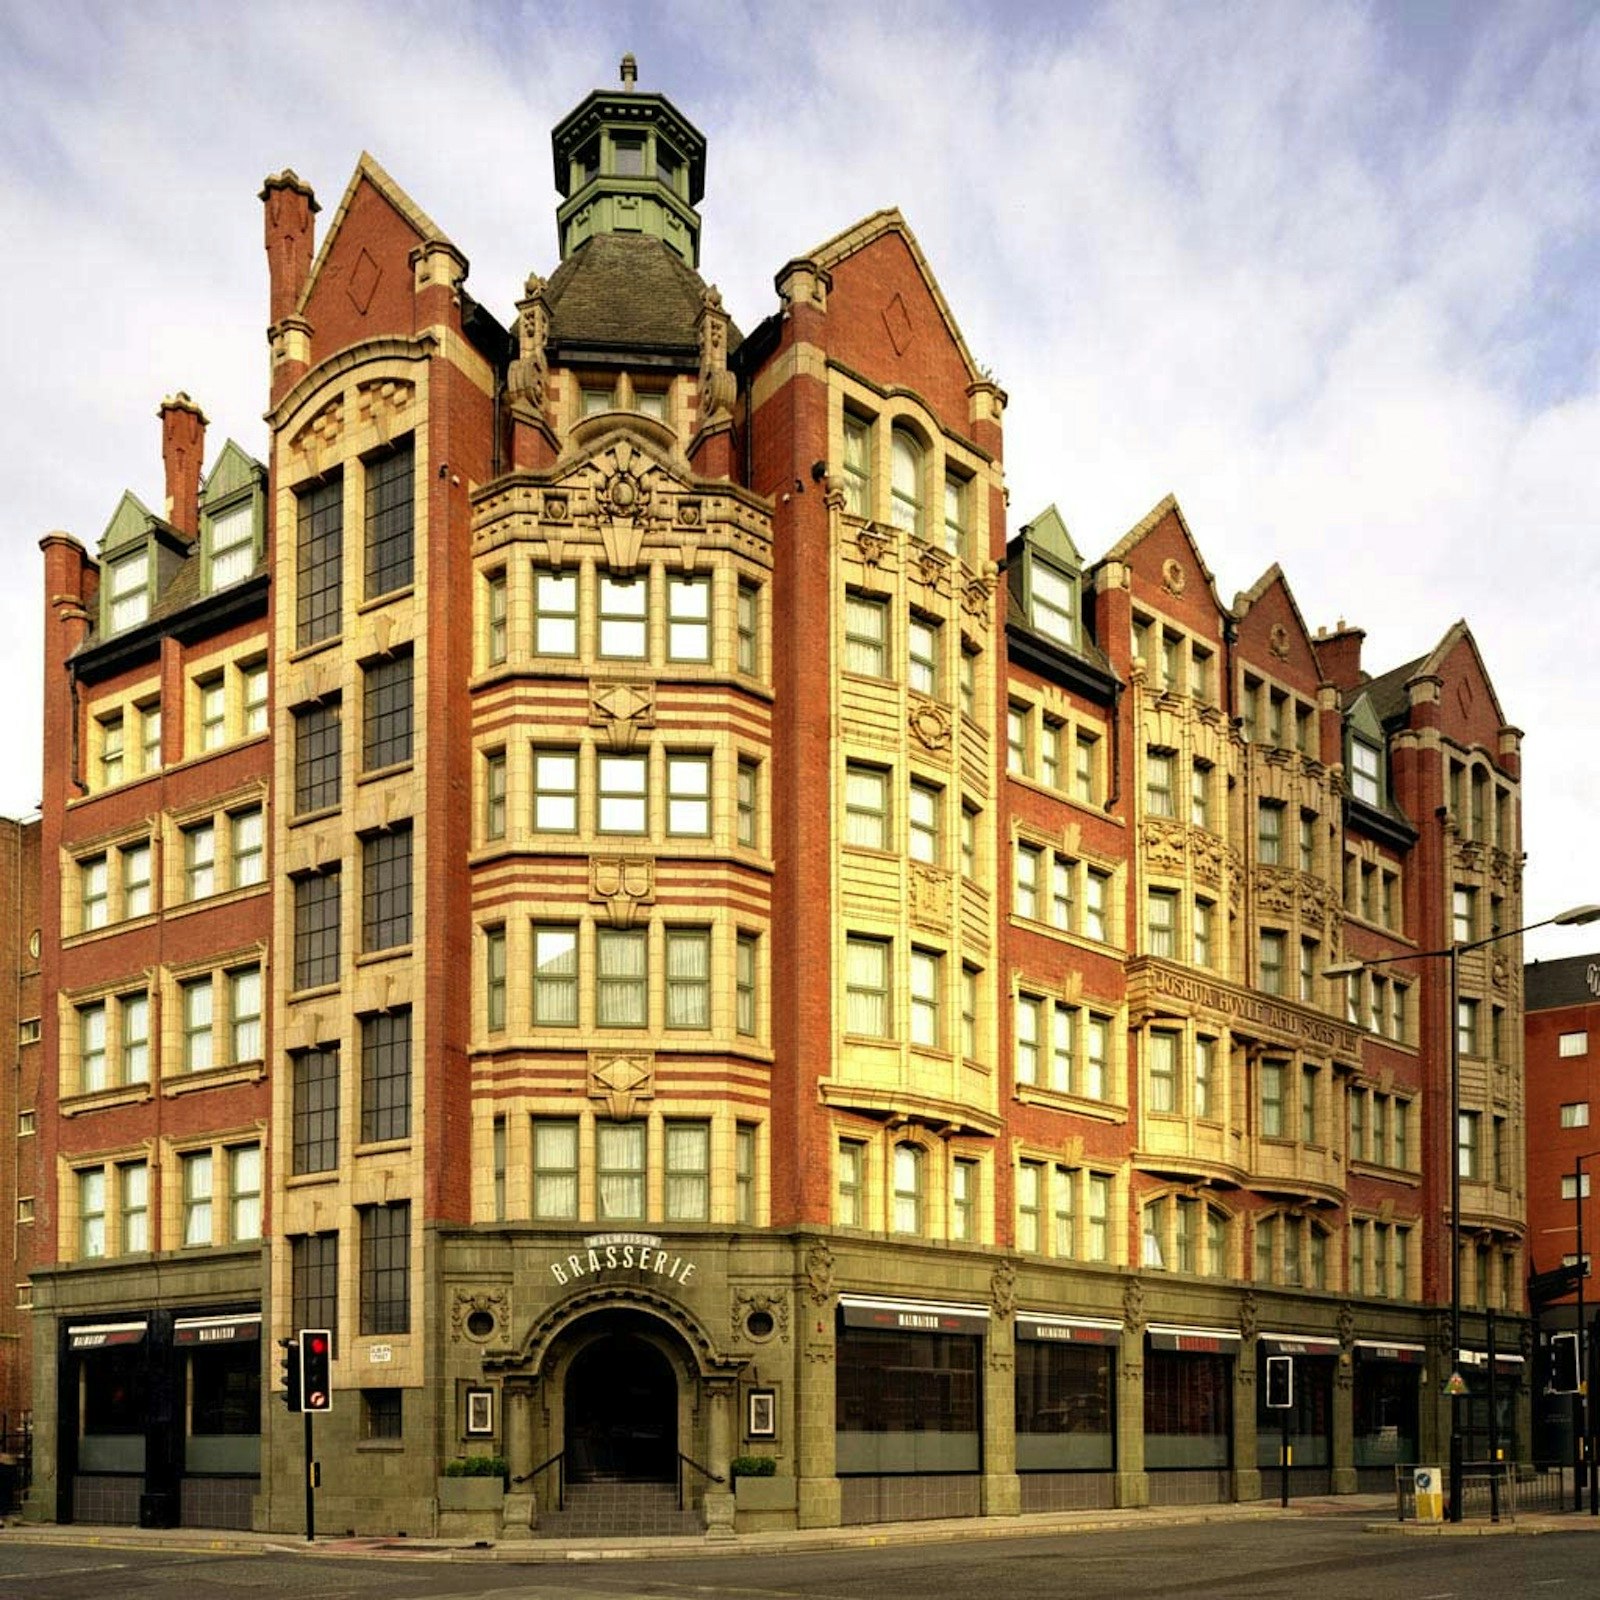 Training Rooms Venues in Manchester - Malmaison, Manchester